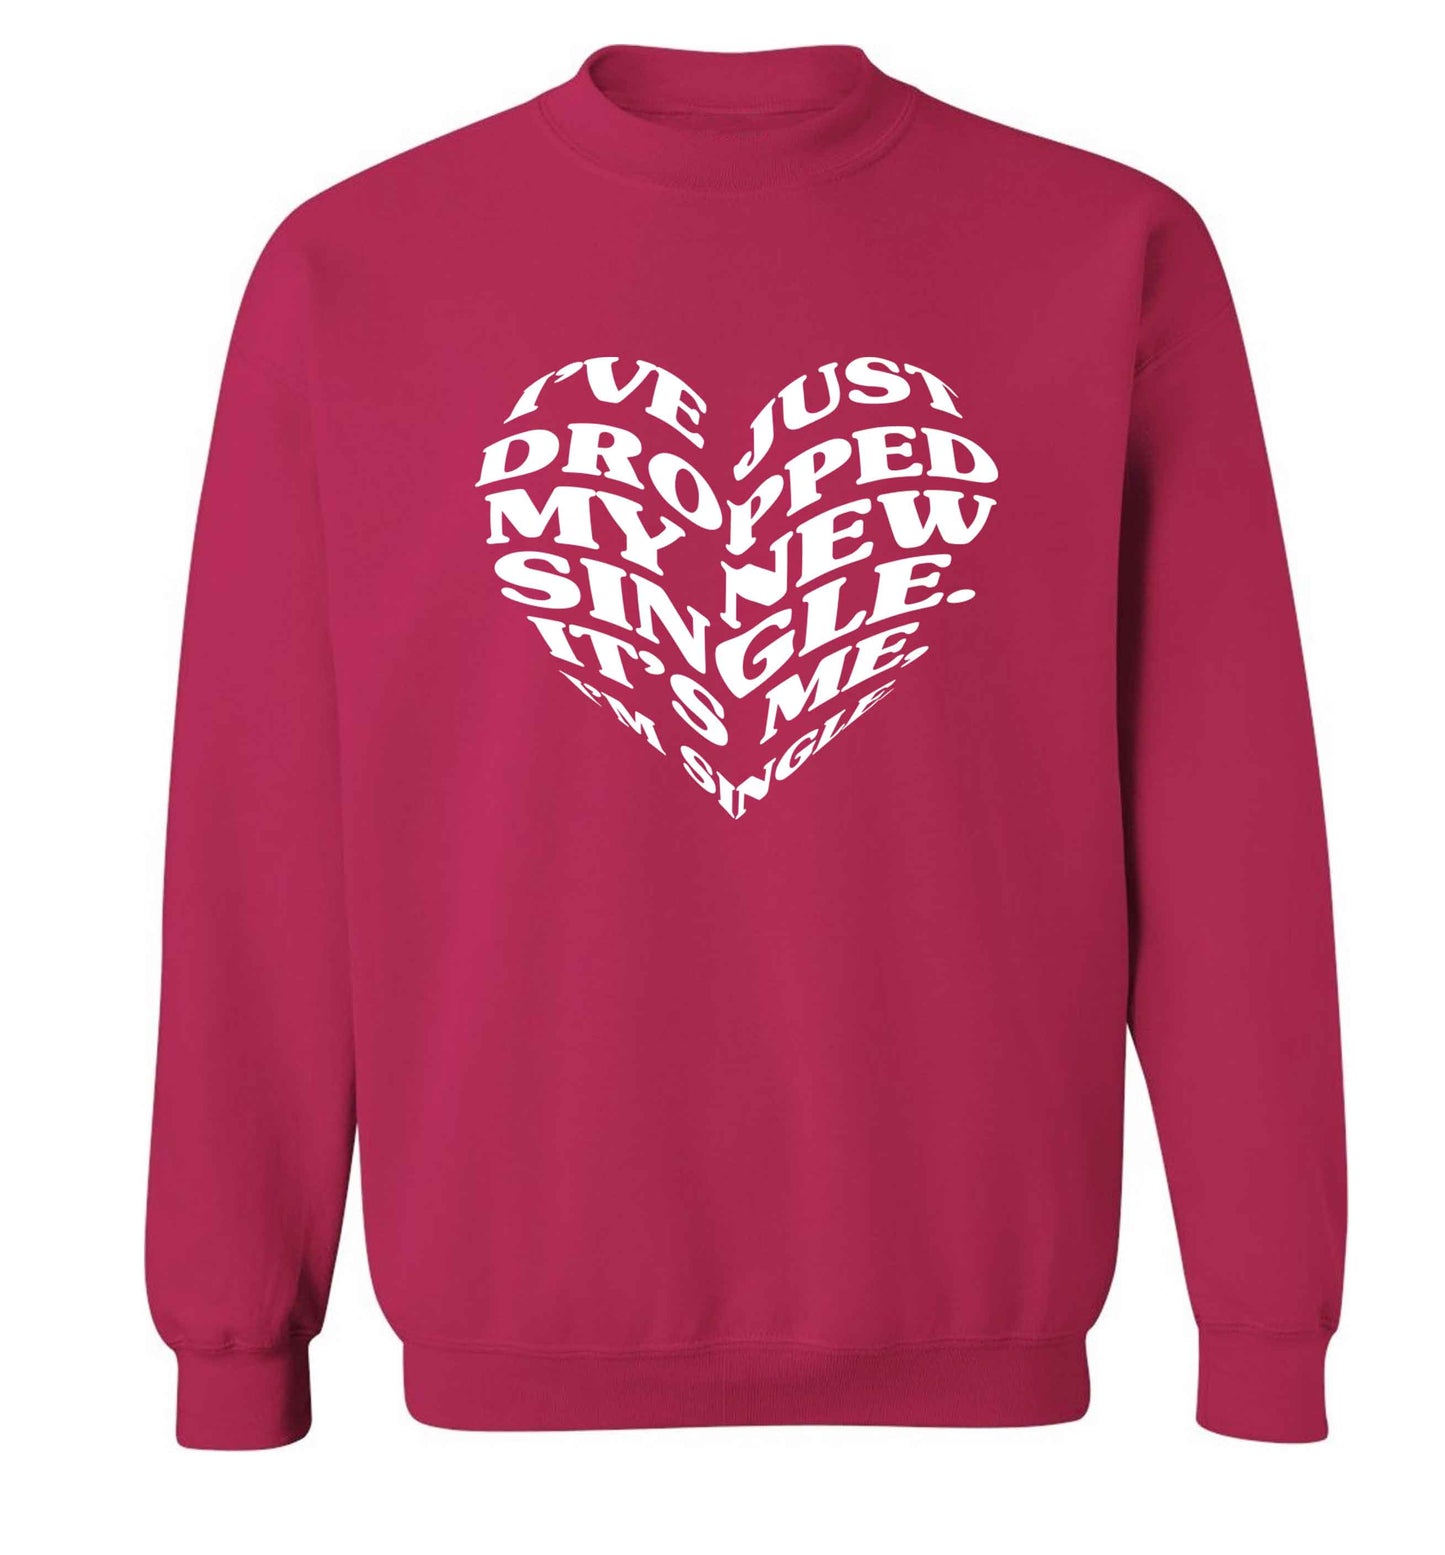 I've just dropped my new single it's me I'm single adult's unisex pink sweater 2XL